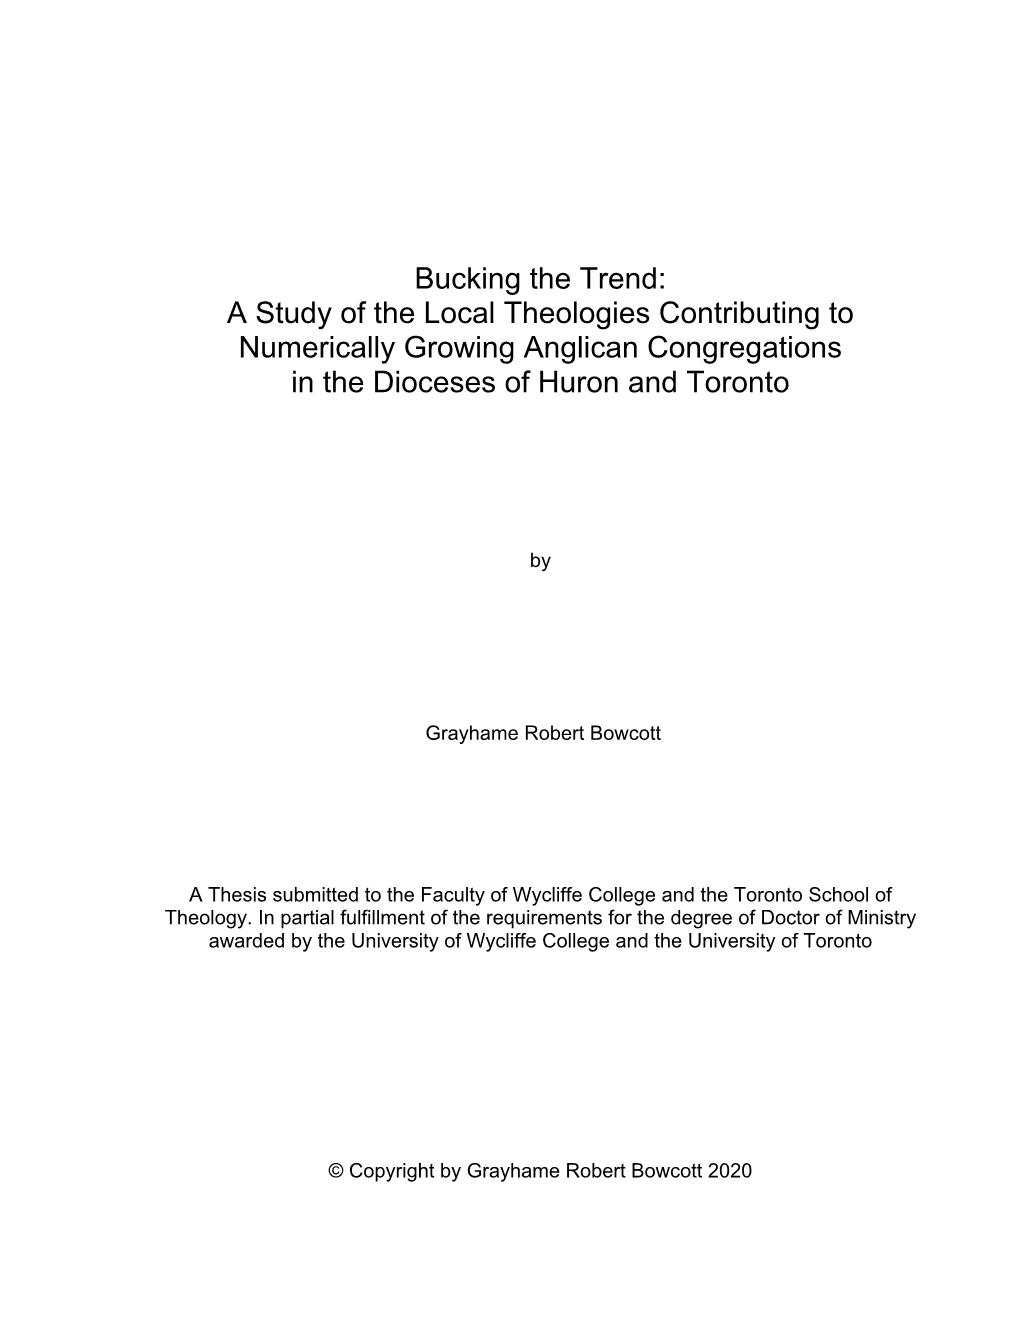 Bucking the Trend: a Study of the Local Theologies Contributing to Numerically Growing Anglican Congregations in the Dioceses of Huron and Toronto